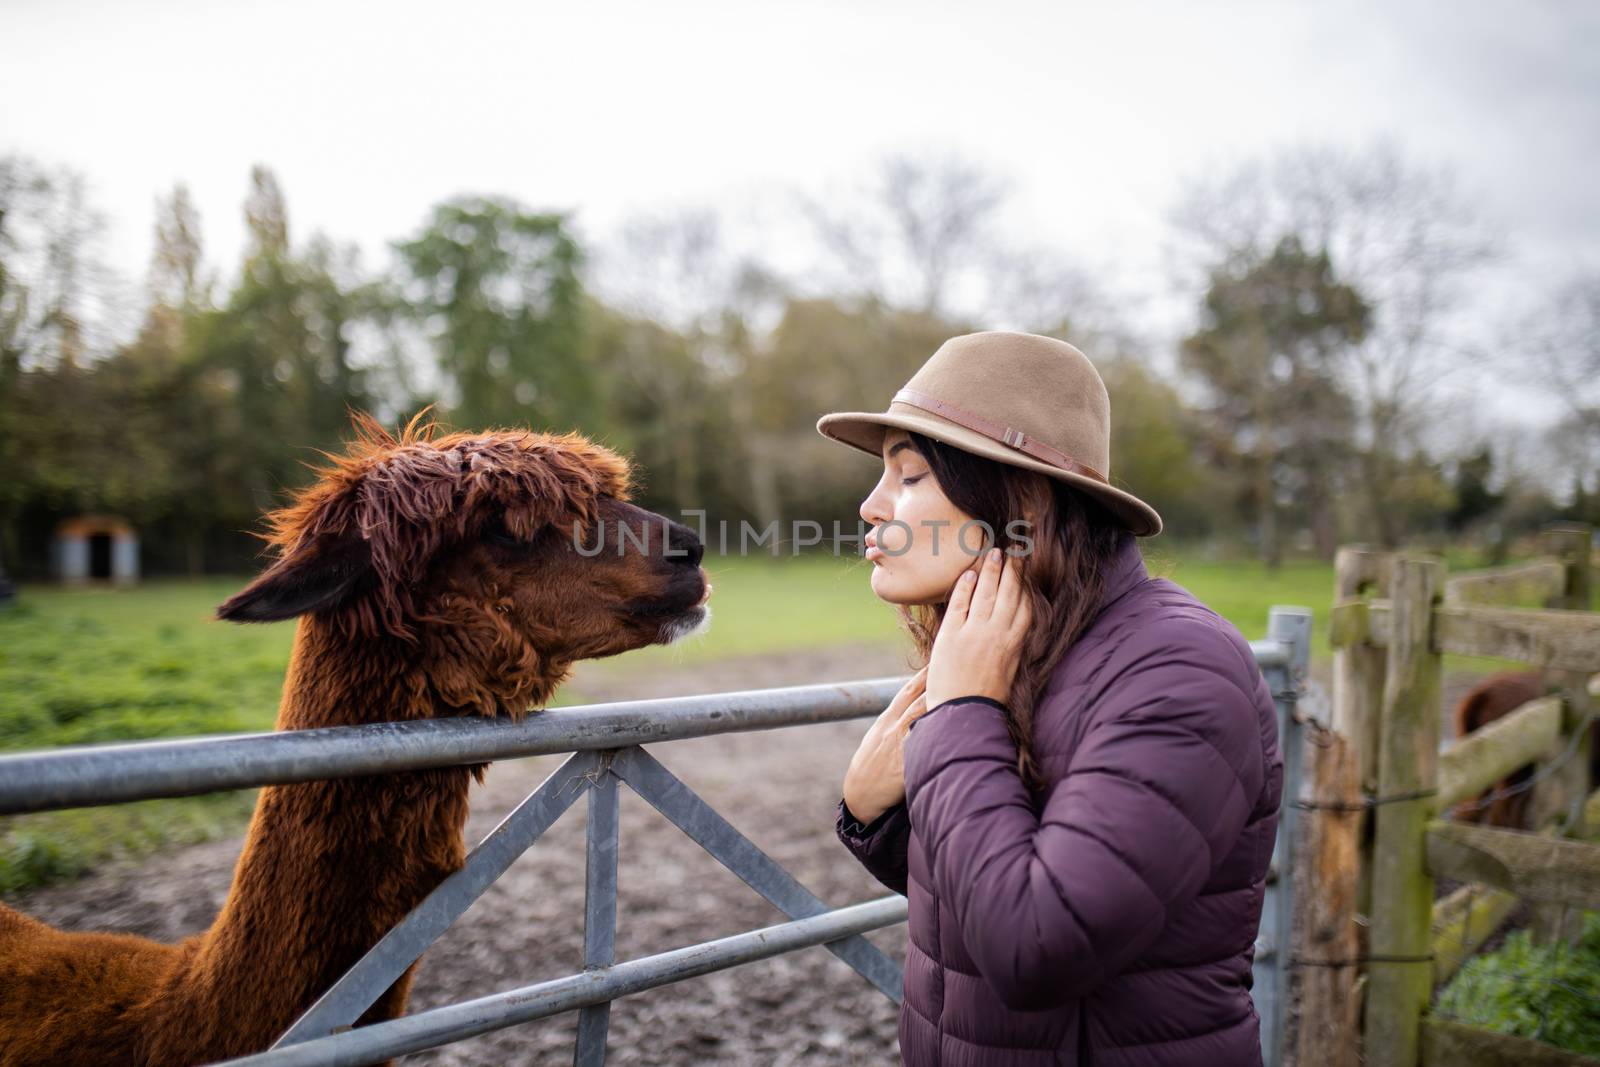 Brunette woman wearing a hat pretending to kiss a brown alpaca behind a metal and wood fence at a farmyard, with a forest as background